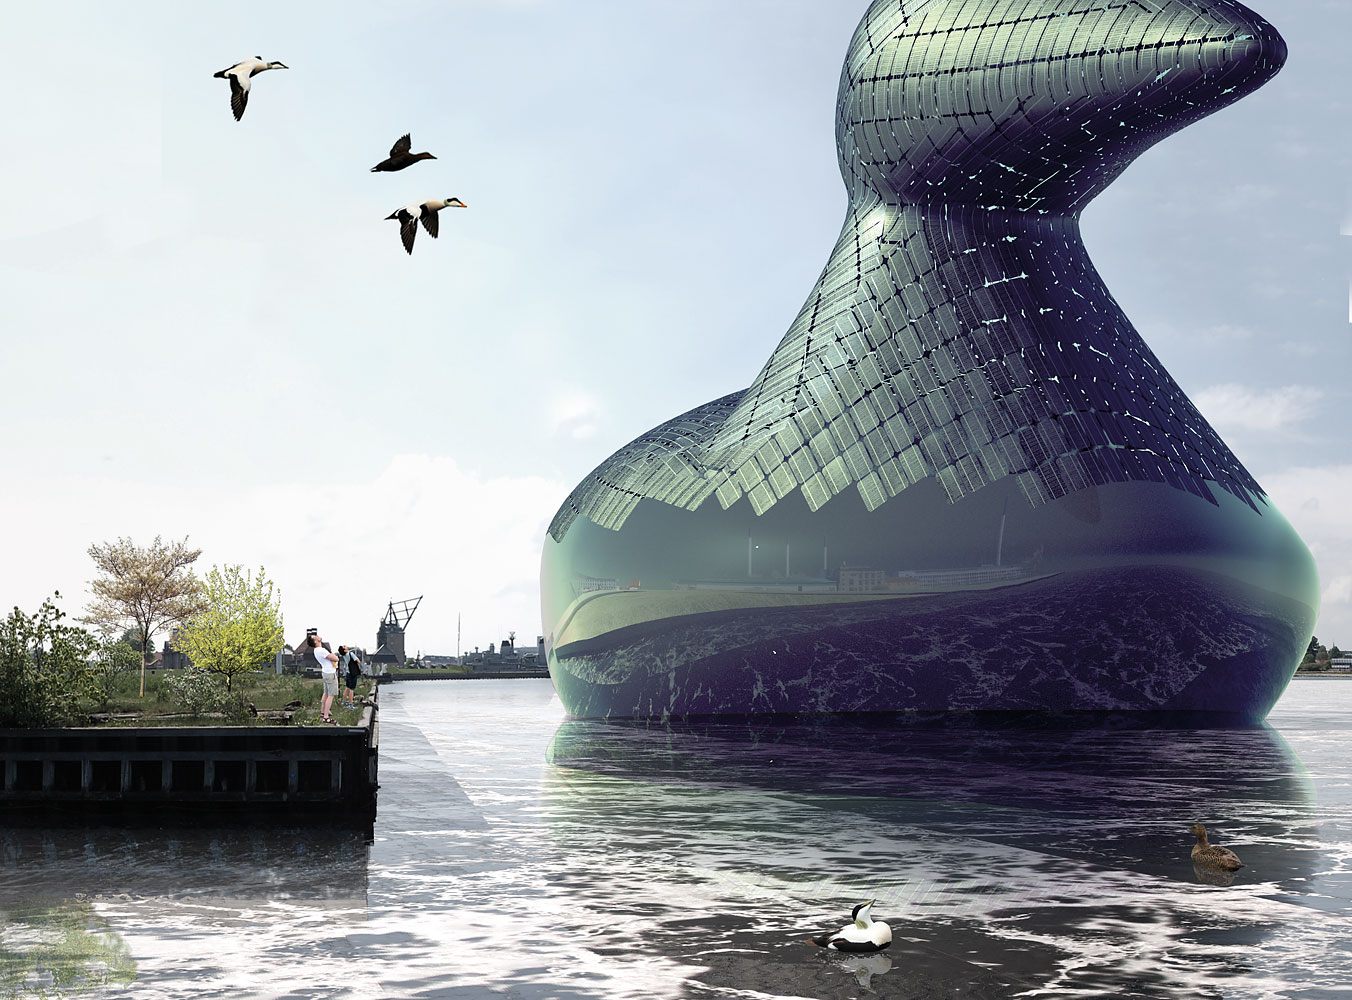 Energy Duck: A submission to the 2014 Land Art Generator Initiative Copenhagen design competition by artists Hareth Pochee, Adam Khan, Louis Leger and Patrick Fryer. (Courtesy Land Art Generator Initiative)